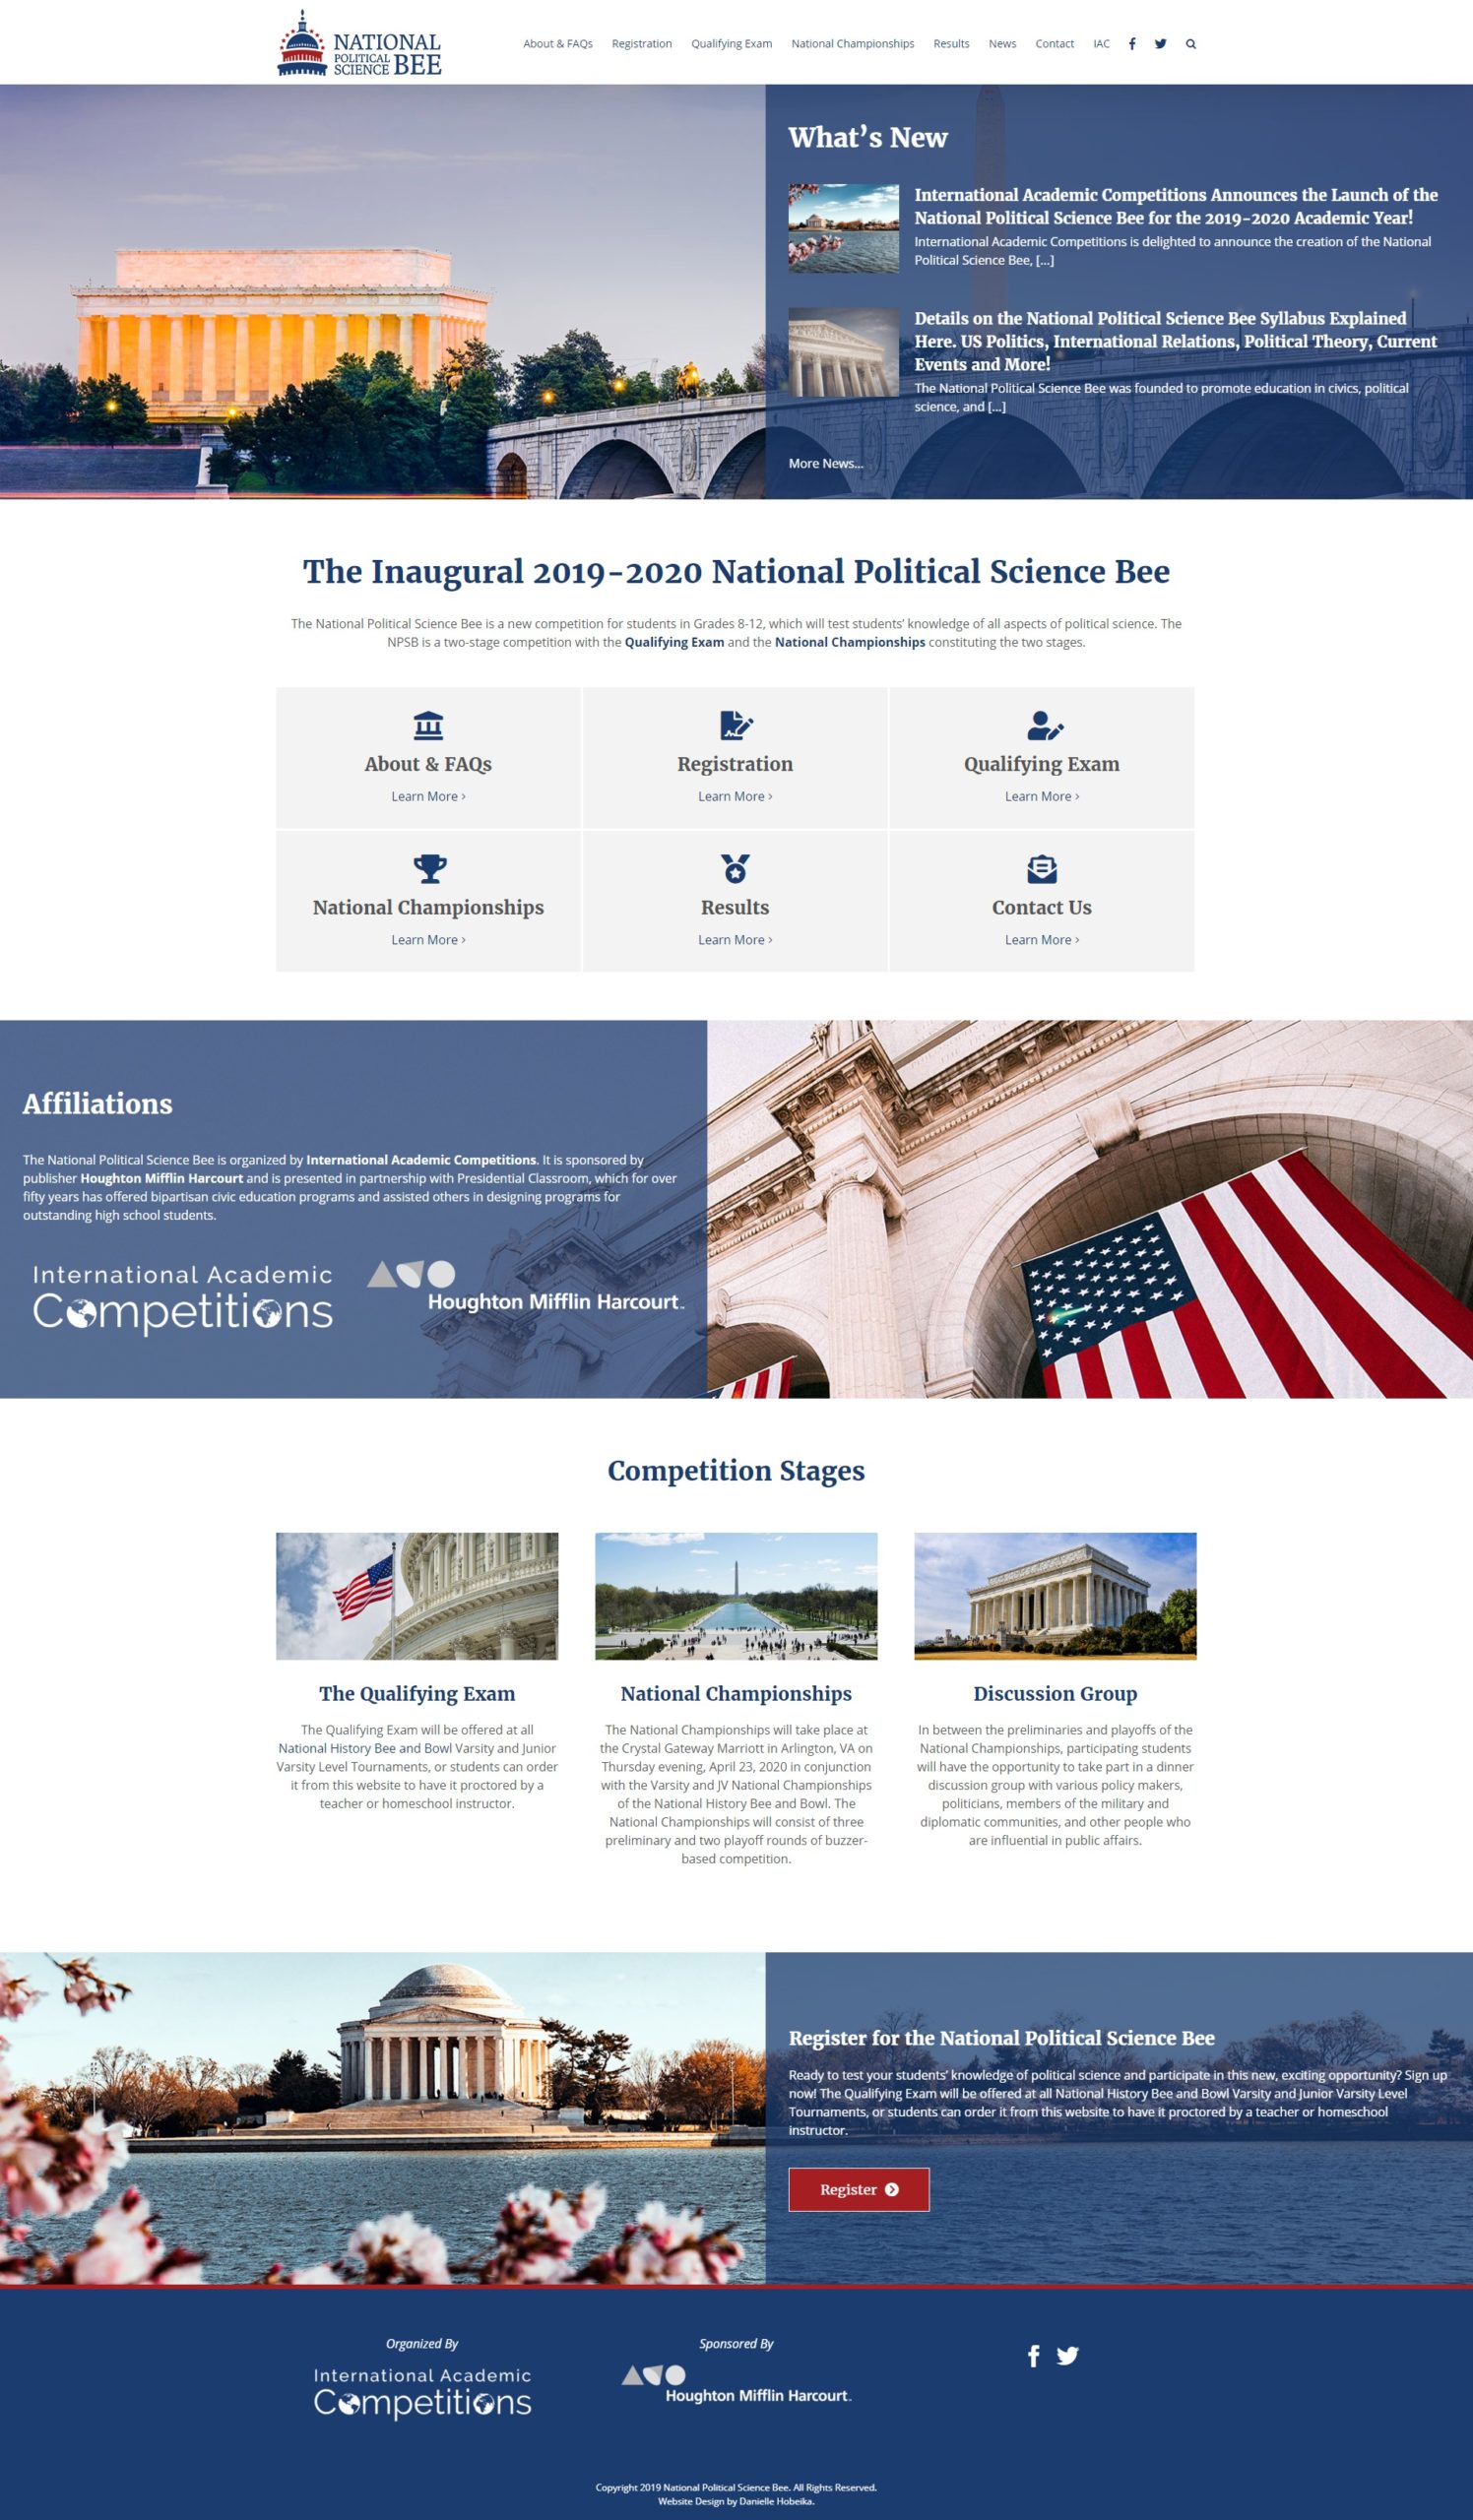 PP Events Archives - Political Science